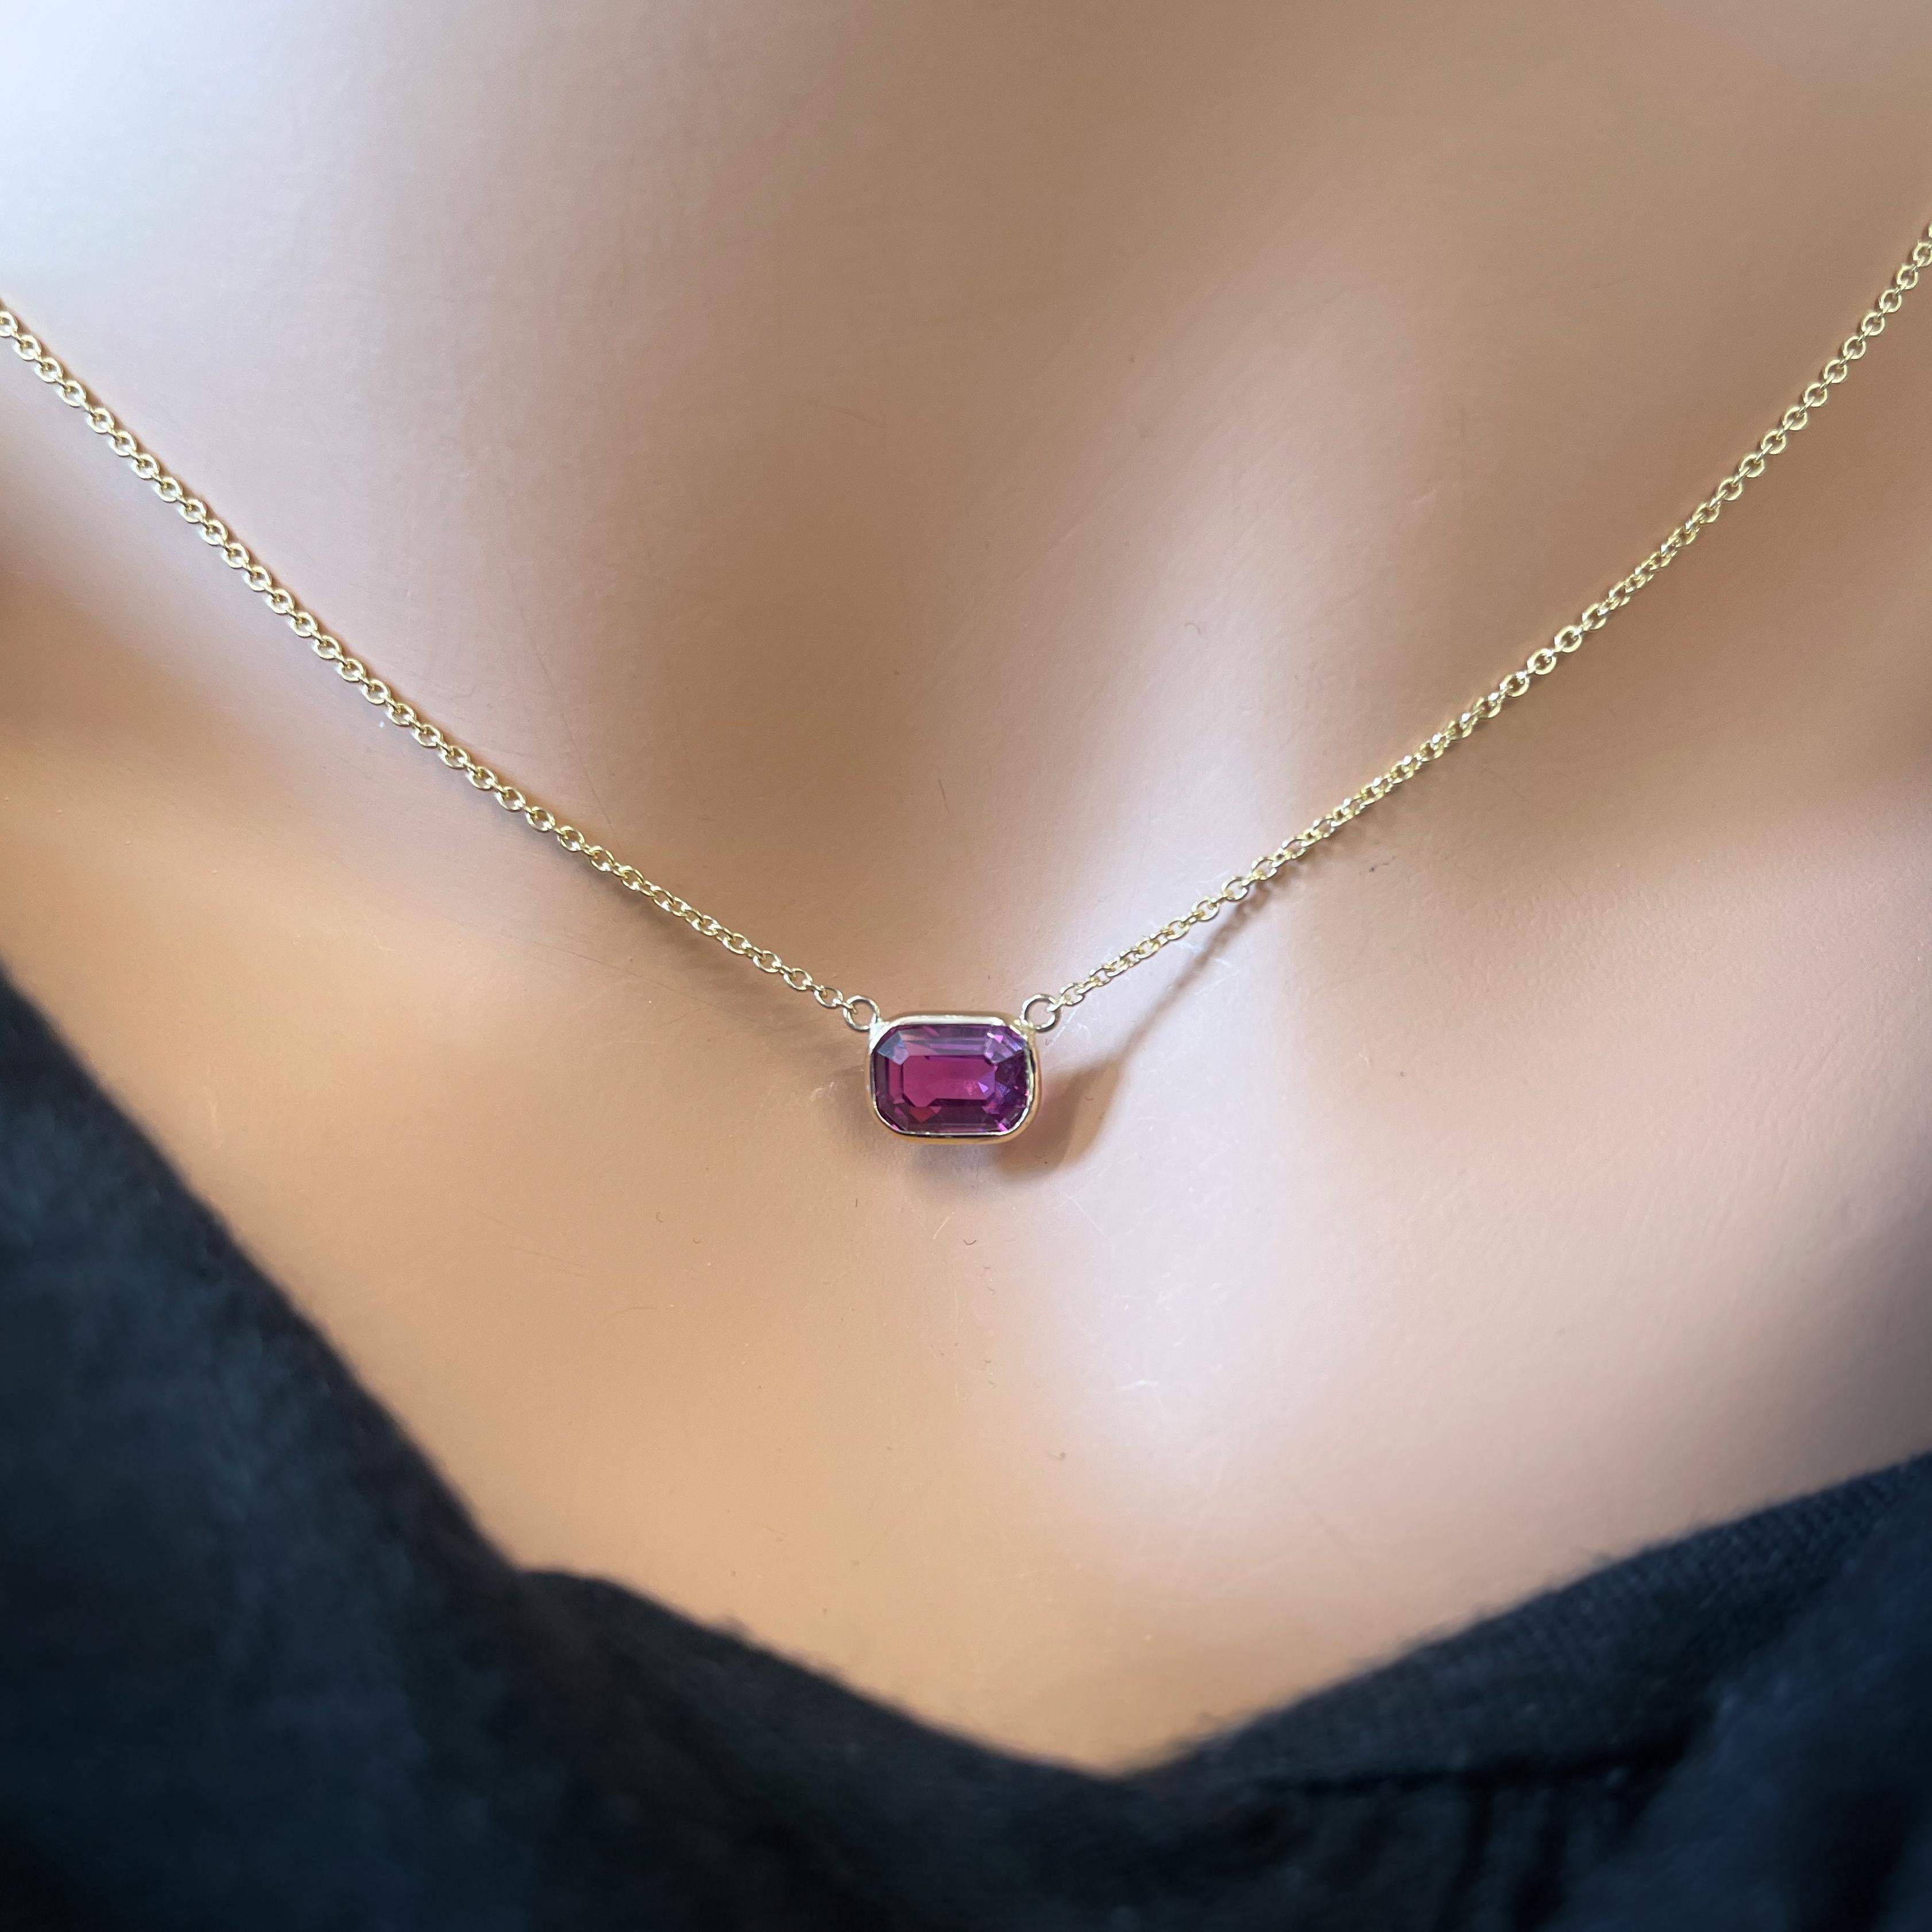 This necklace features an emerald-cut pinkish red sapphire with a weight of 2.17 carats, set in 14k yellow gold (YG). Pinkish red sapphires are highly prized for their unique and rich color, and the emerald cut can enhance the gemstone's natural